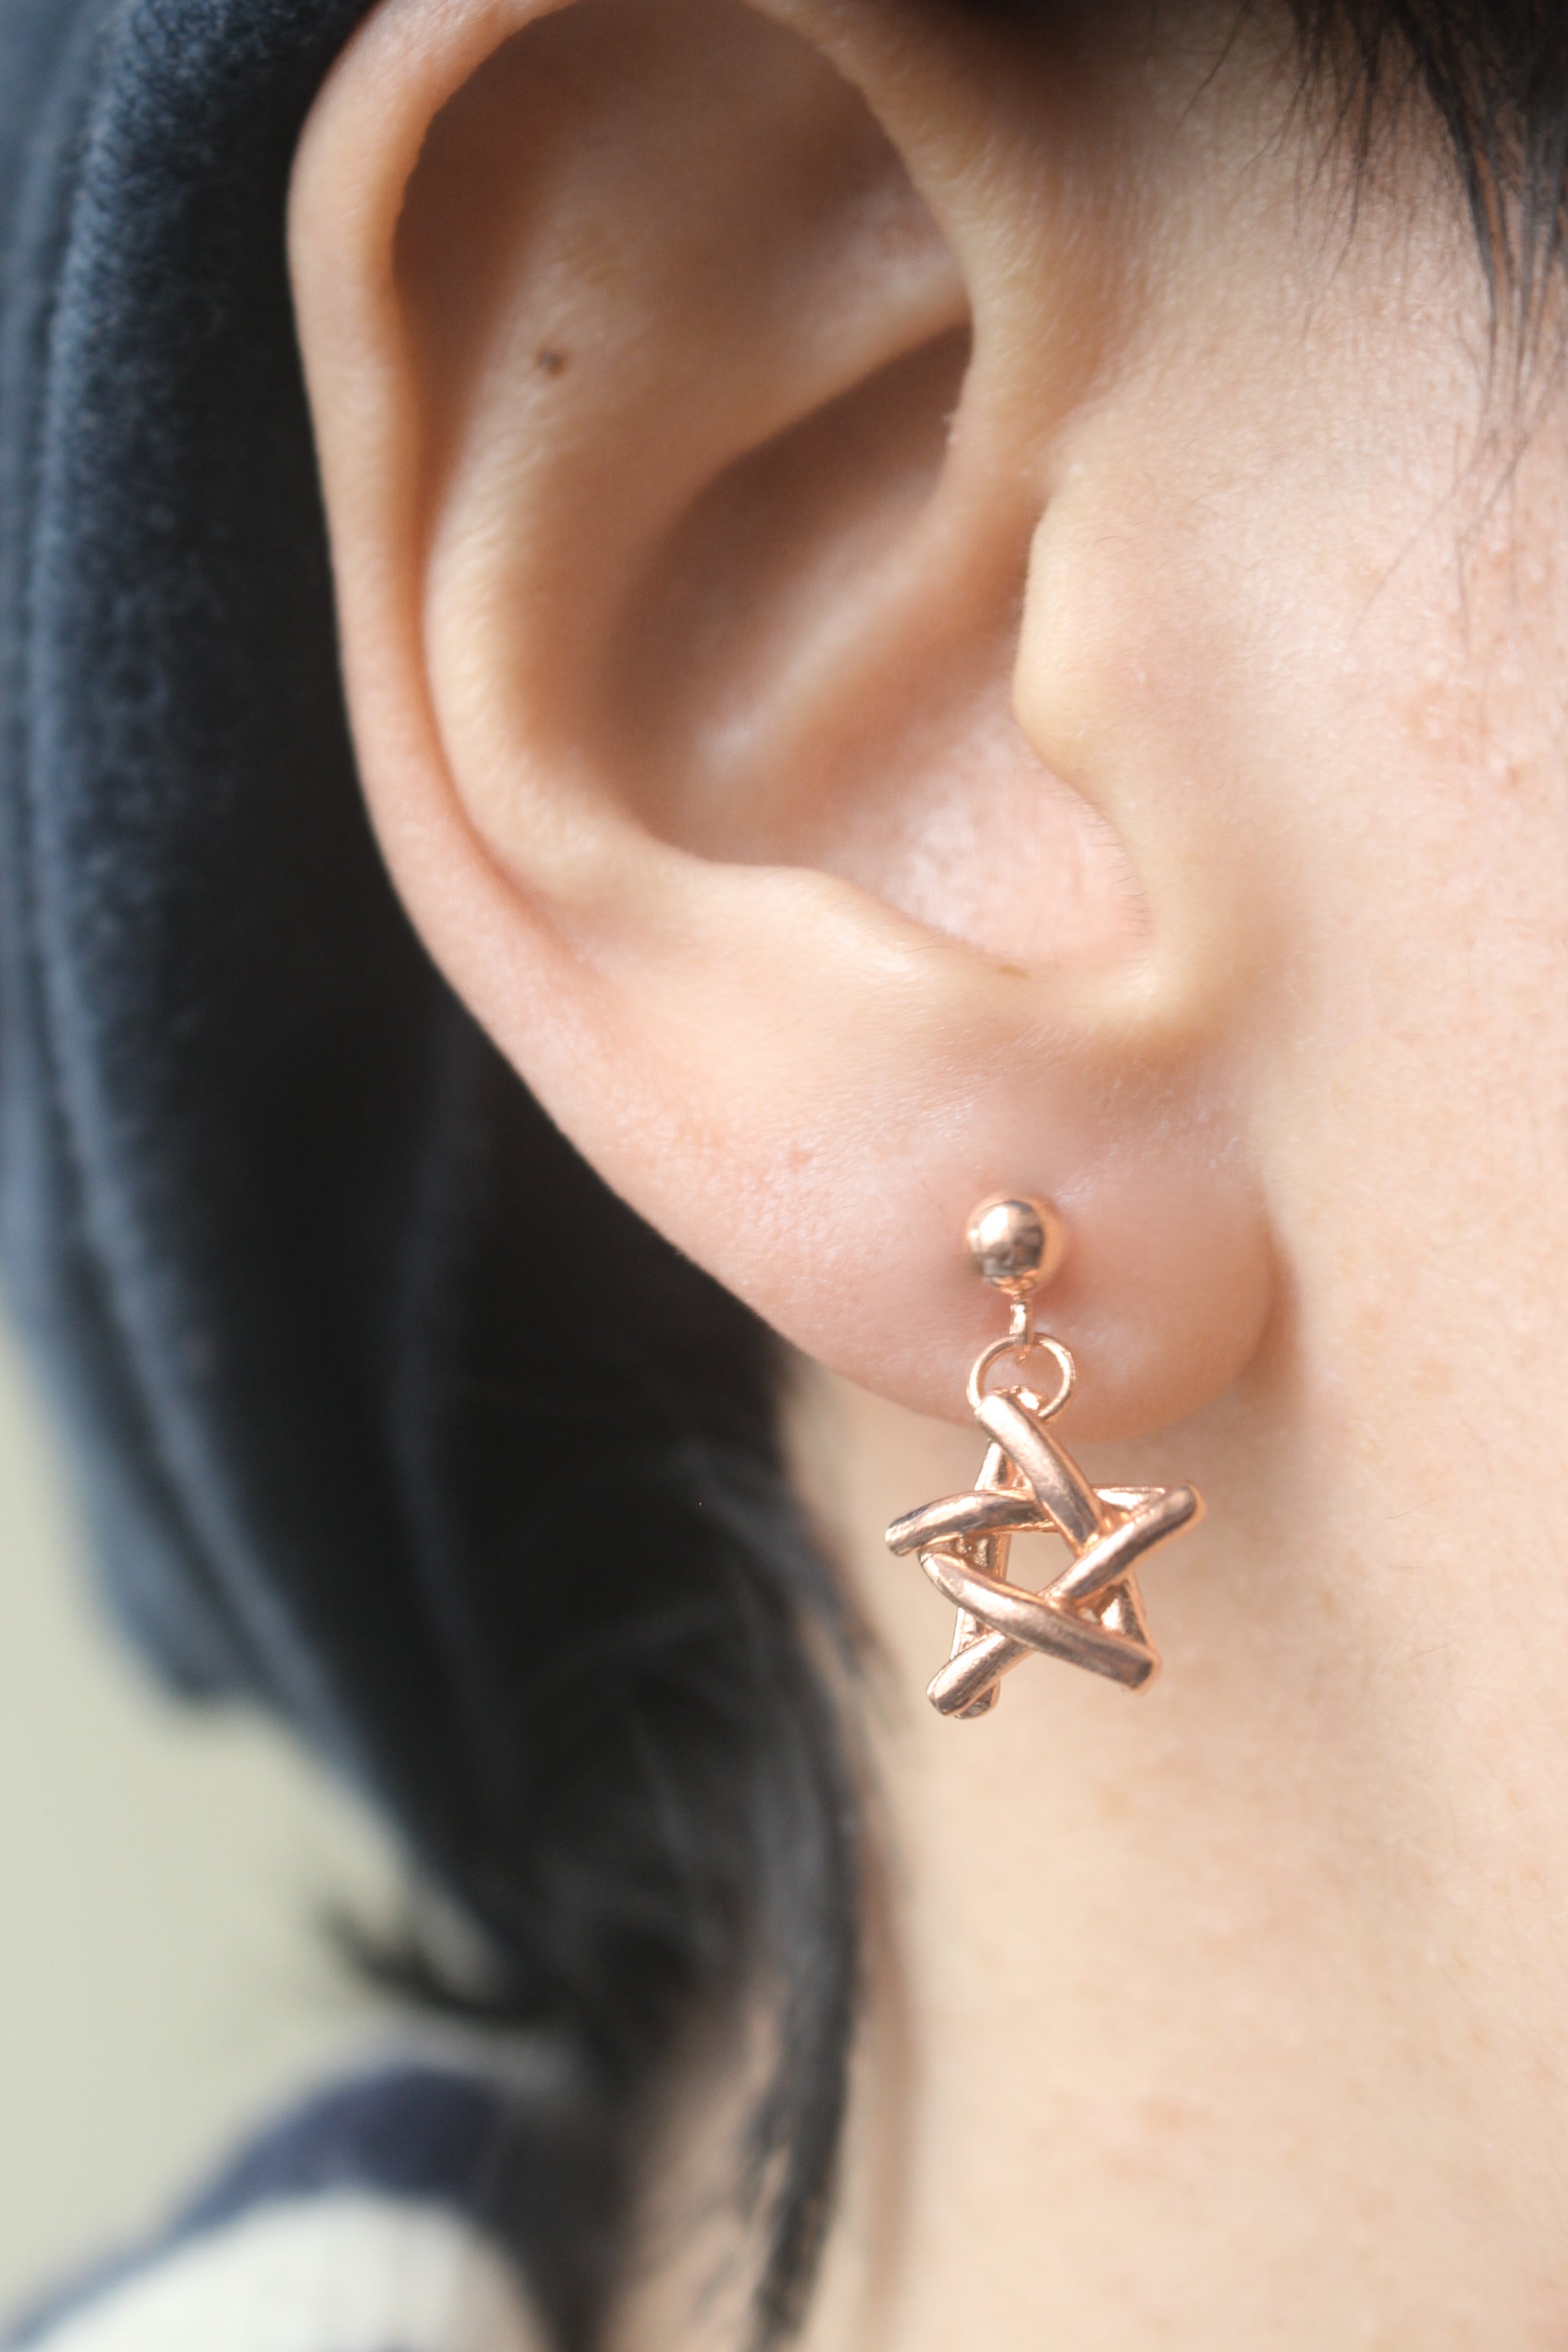 Small Matchstick Star Earrings in Sterling Silver and Rose Gold / Toothpick Star Silver Earrings / Silver Star Earrings/ Christmas Star Earrings